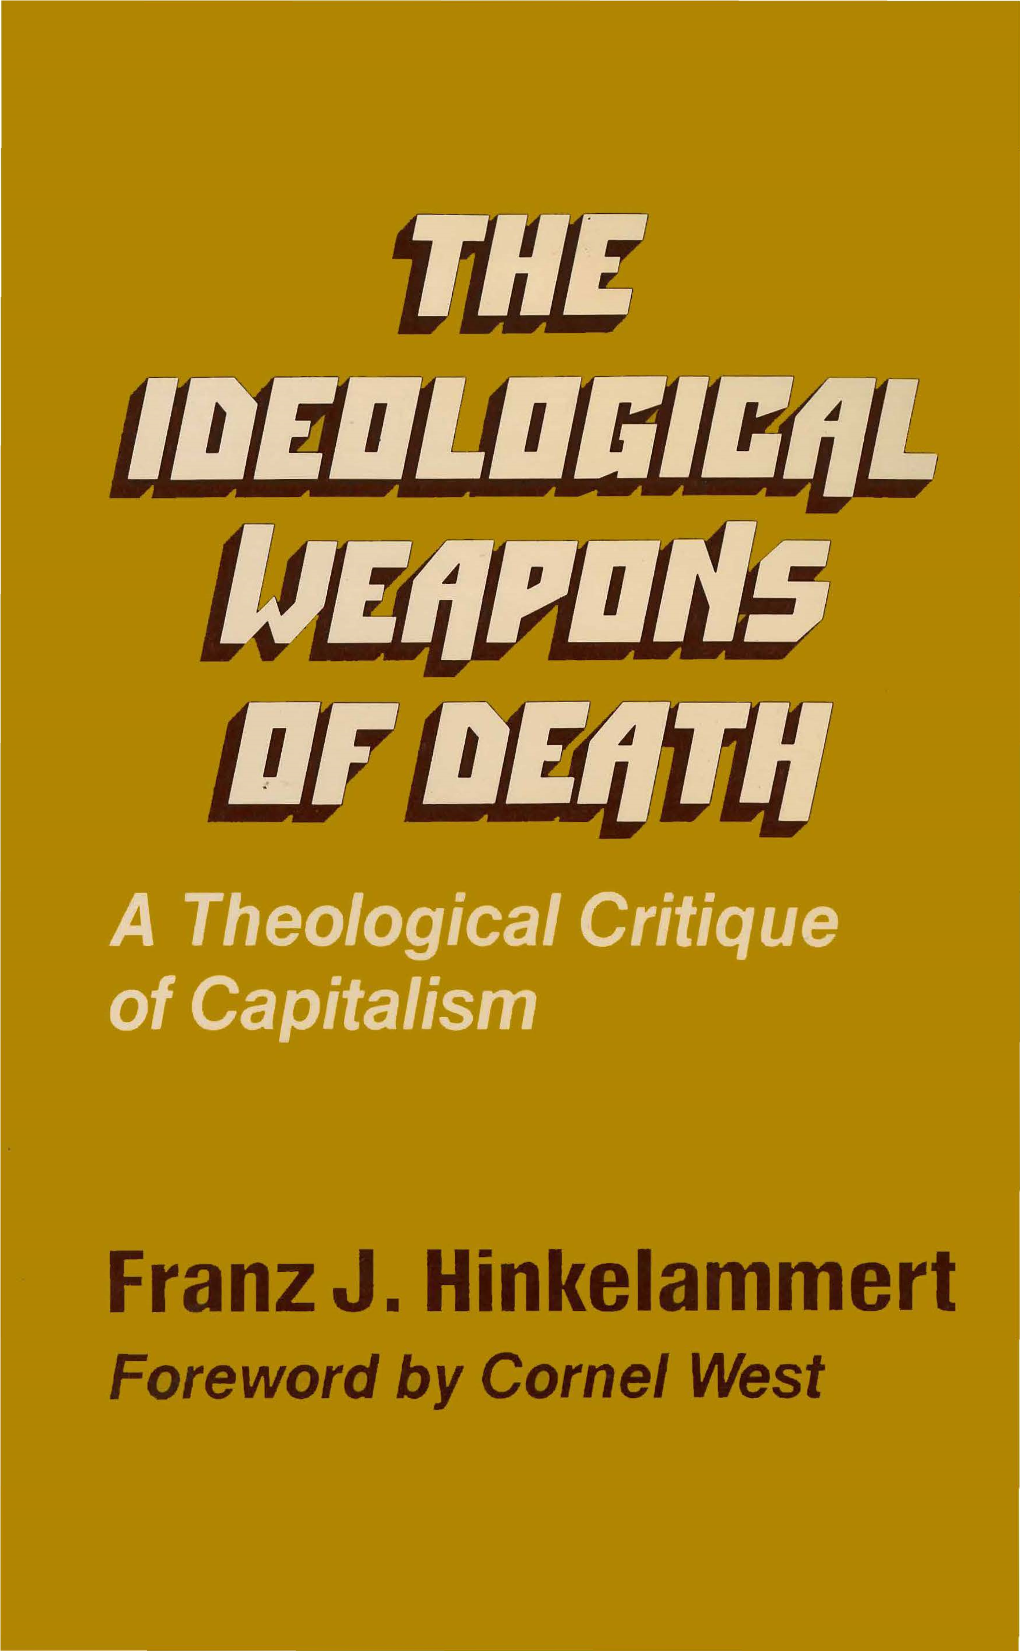 The Ideological Weapons of Death